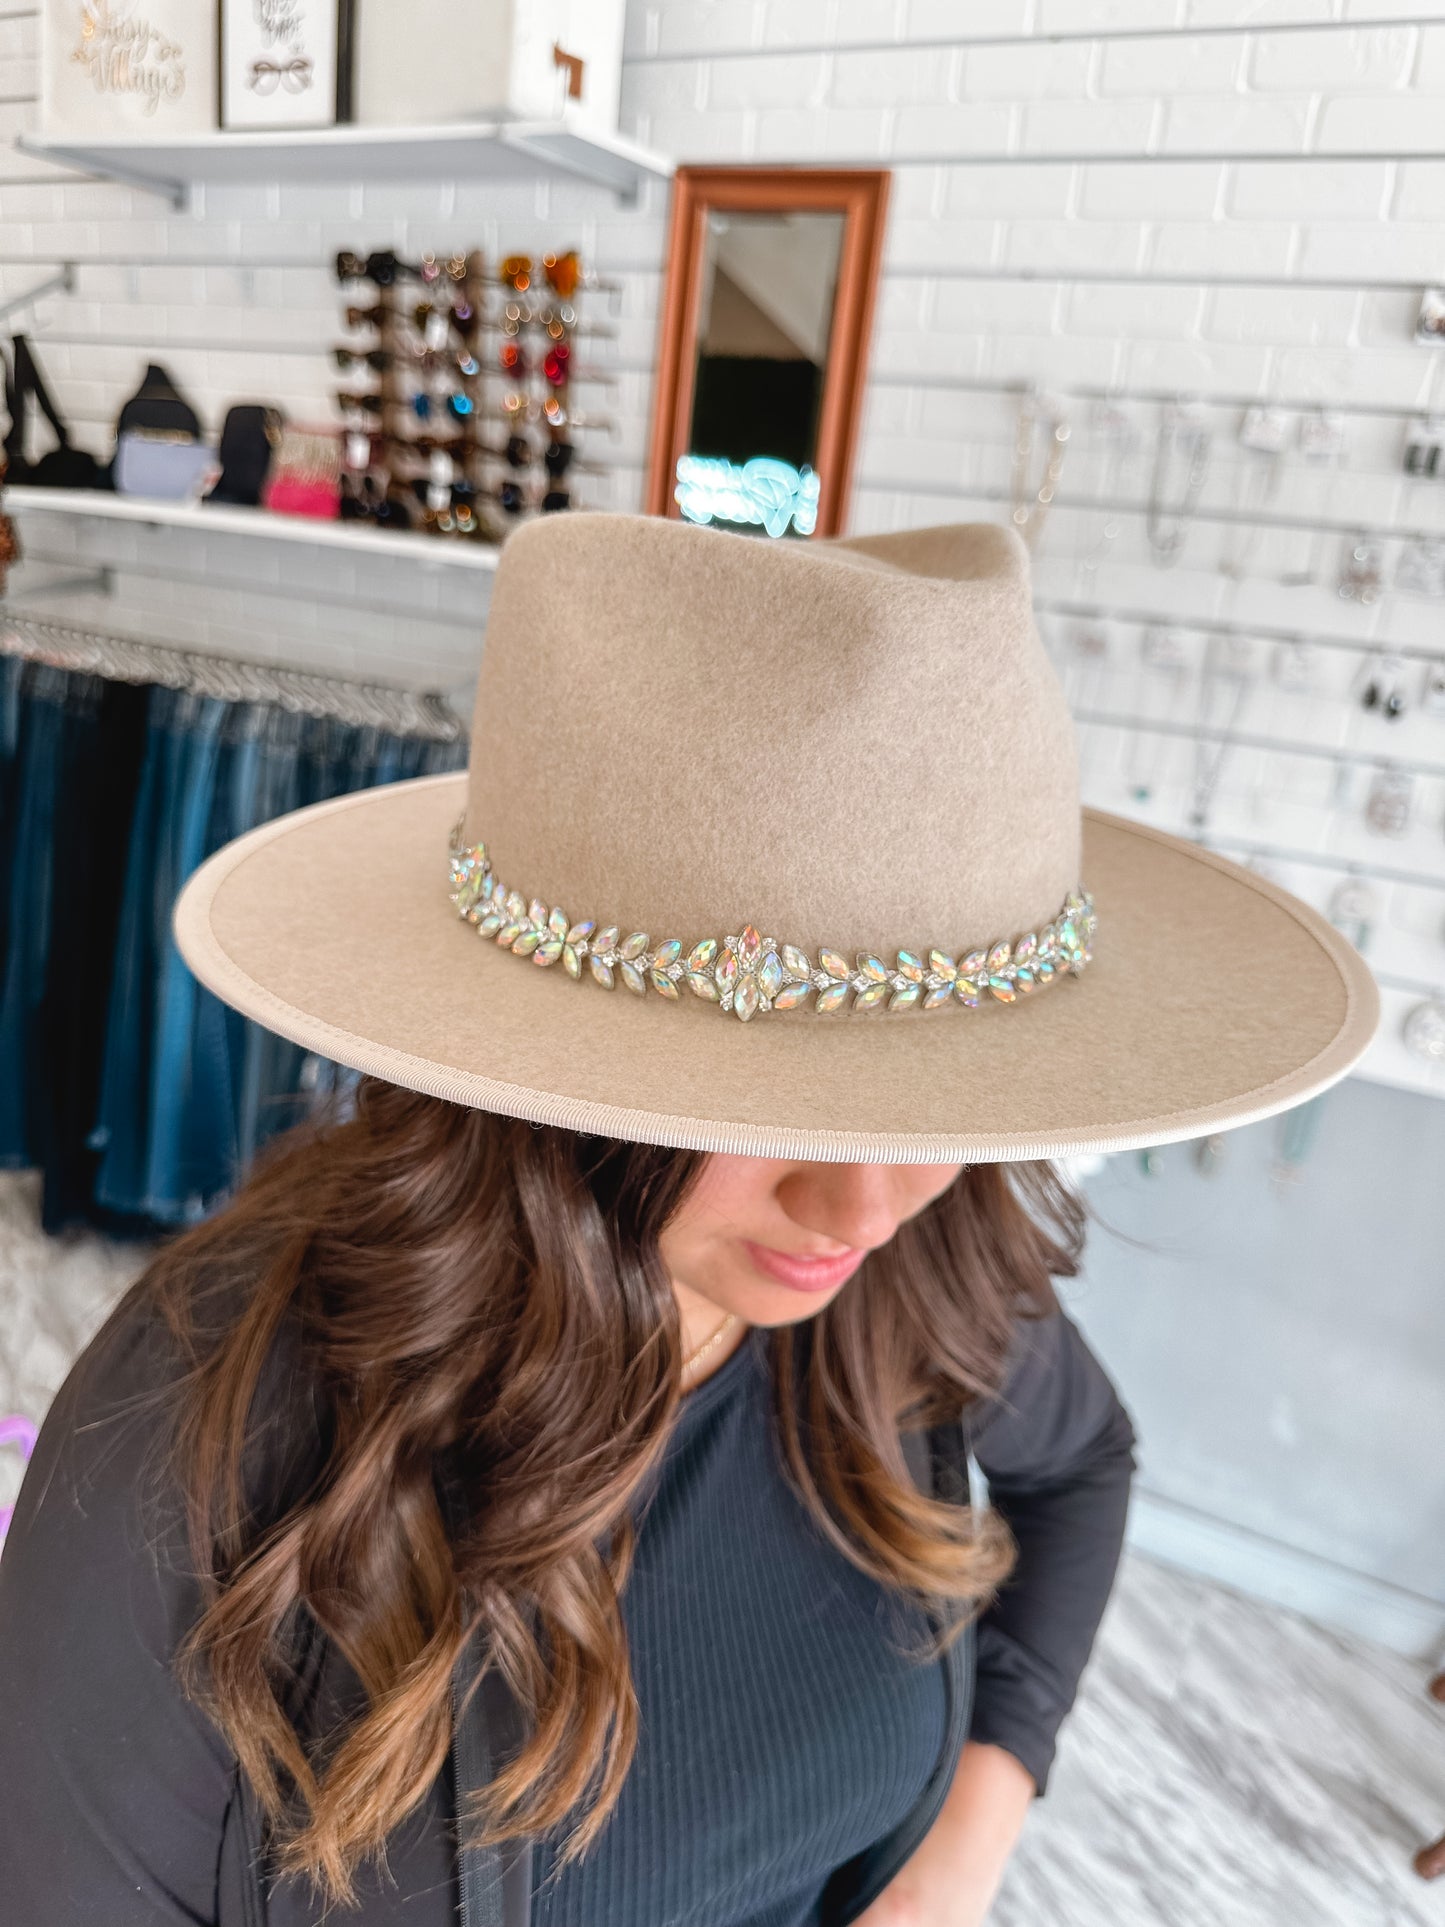 Rionna Crystal Wool Rancher Hat